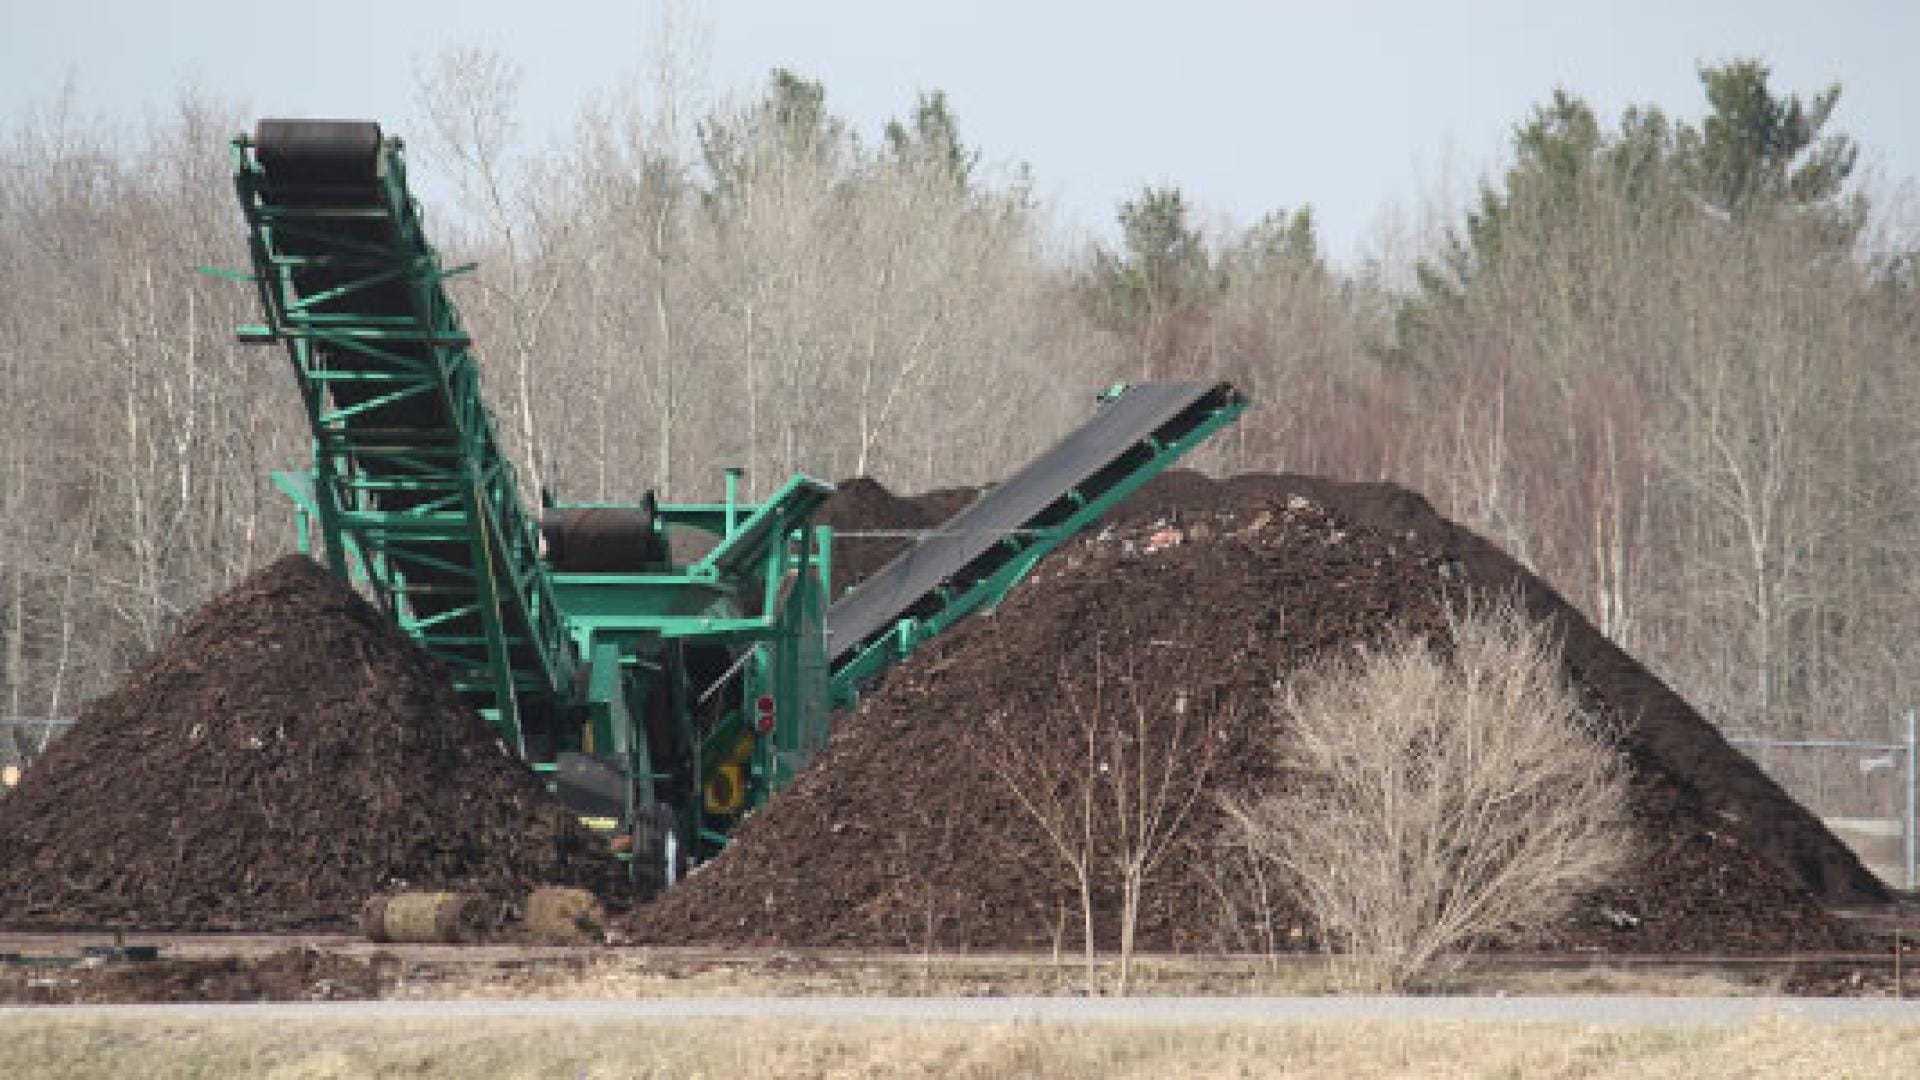 Compost screening at Barrie Landfill